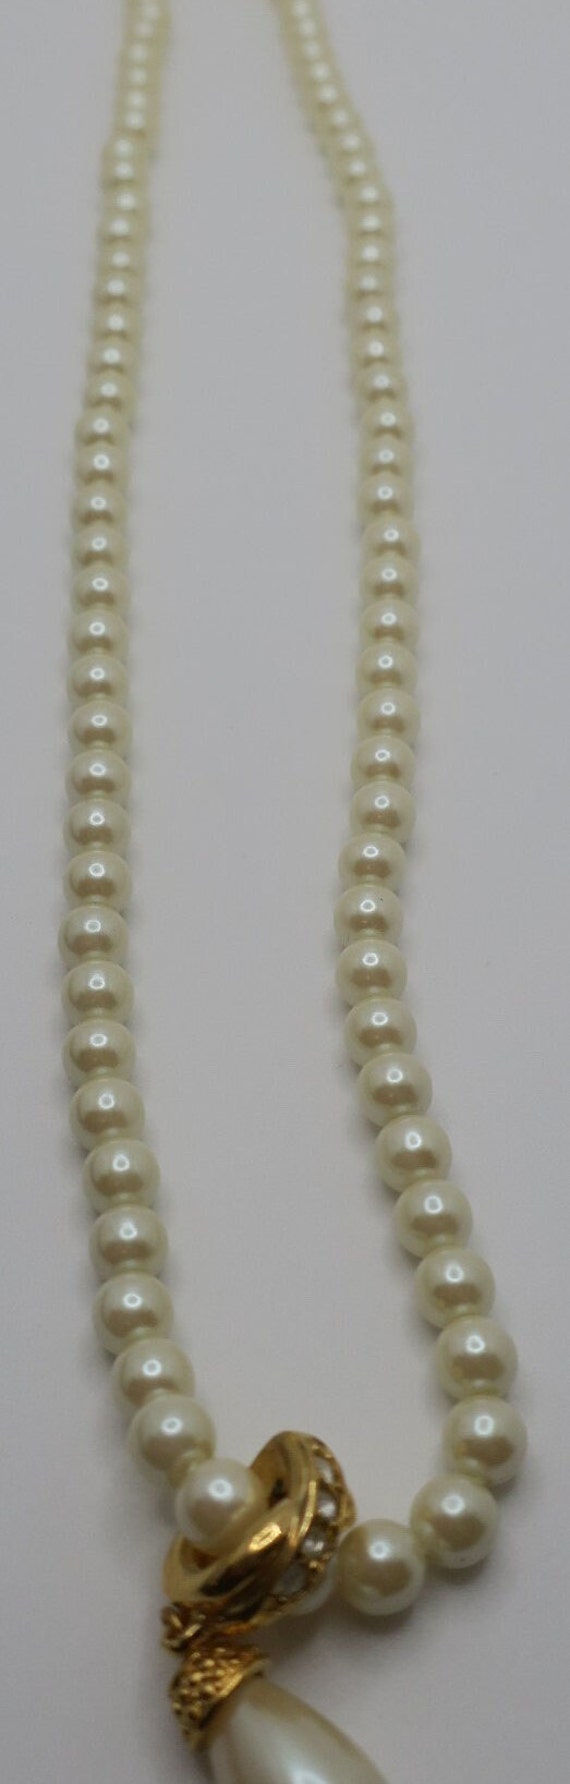 Avon Vintage Faux Pearl Necklace with Gold Tone D… - image 1